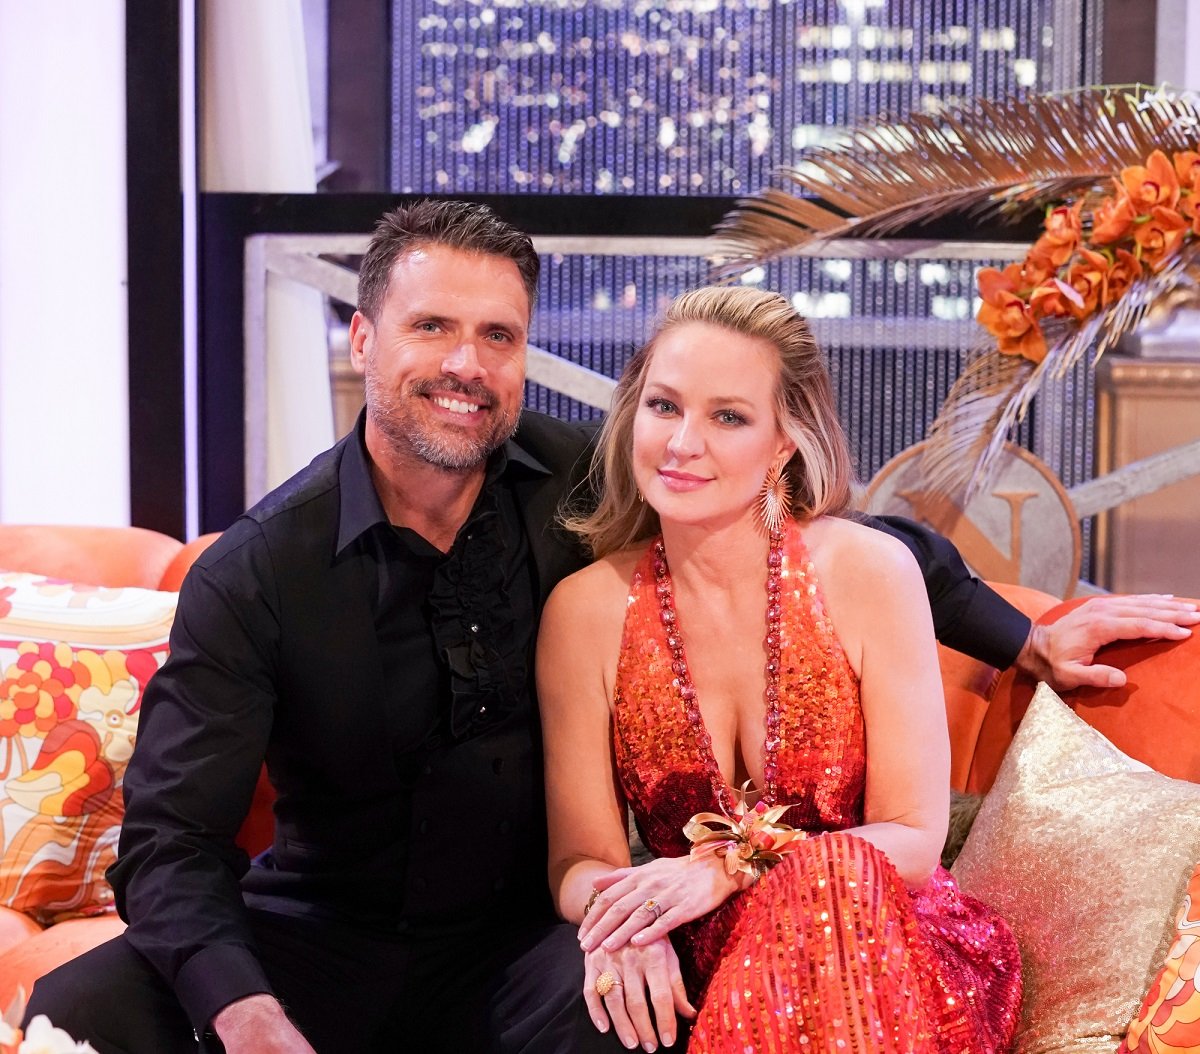 'The Young and the Restless' stars Joshua Morrow and Sharon Case pose together on set of the soap opera.